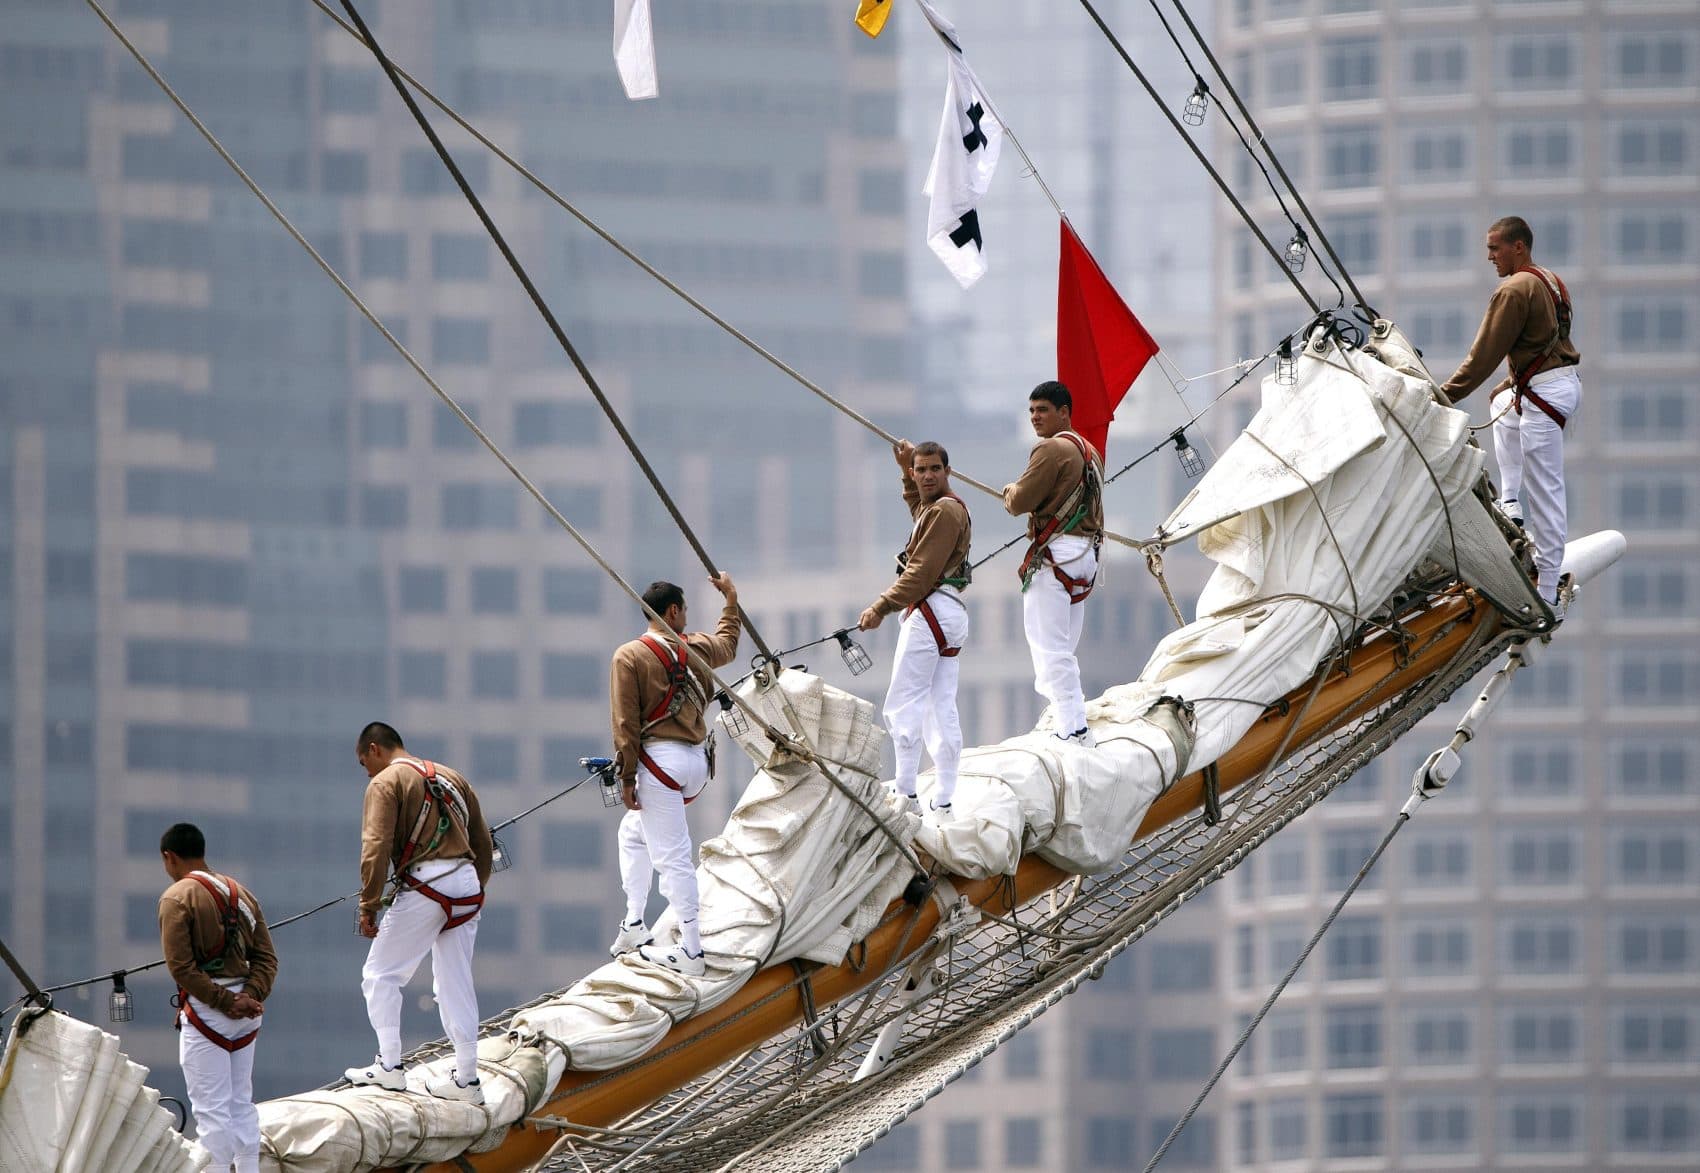 Sailors man the bowsprit on the Chilean Navy tall ship Esmerelda during Sail Boston's Parade of Sail on Saturday. (Michael Dwyer/AP)